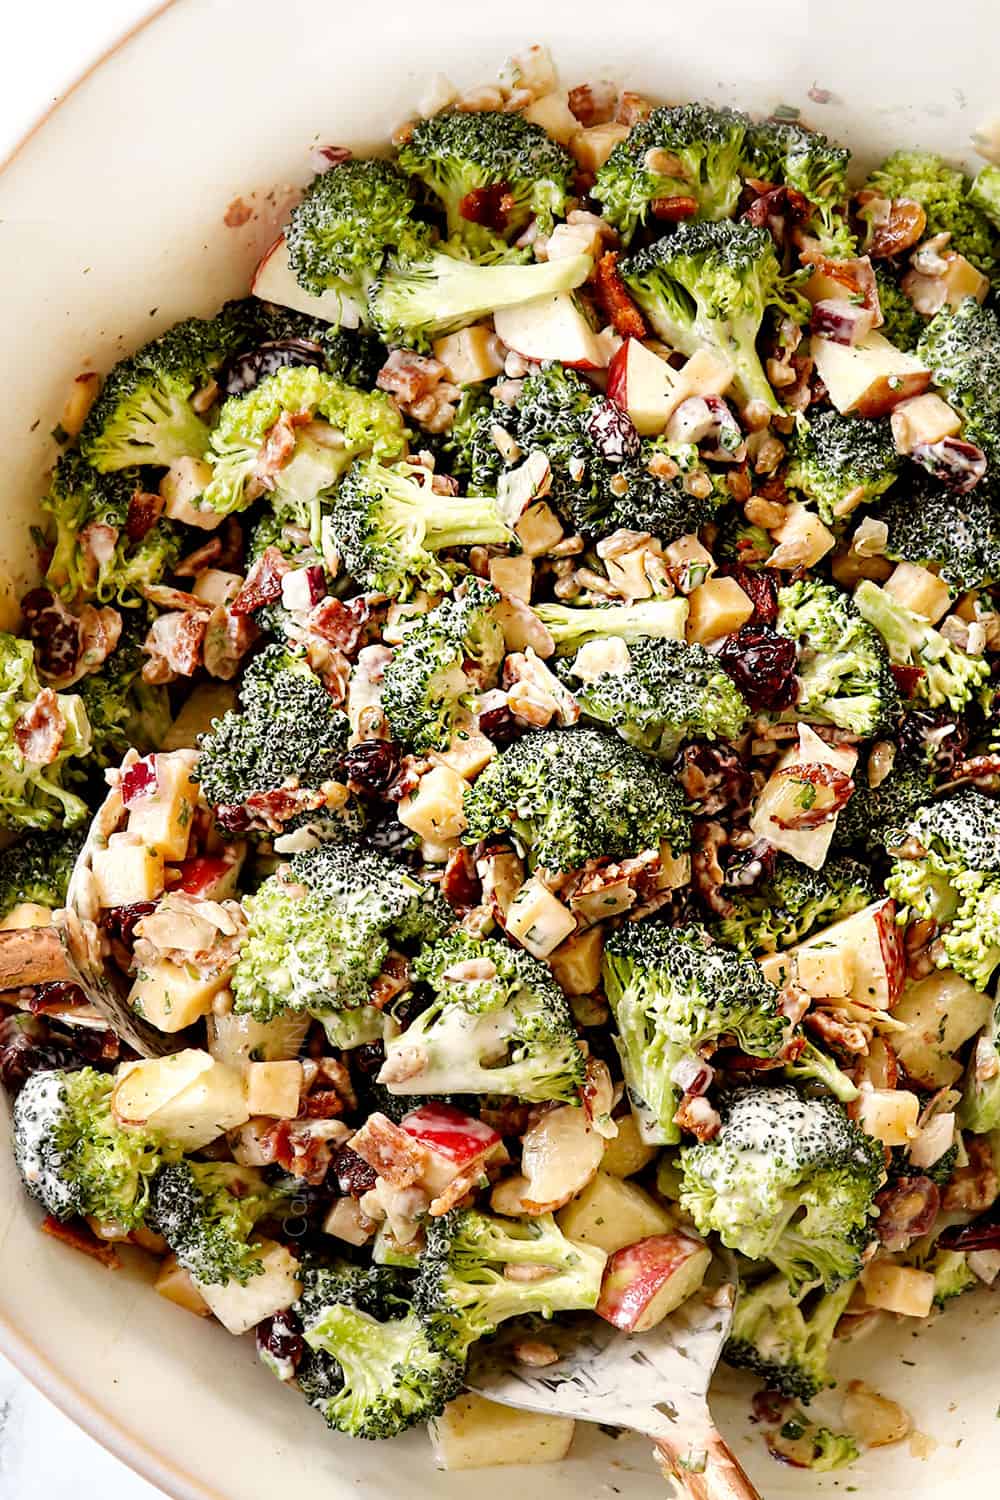 top view showing how to make best broccoli salad by tossing all of the ingredients together in a white bowl